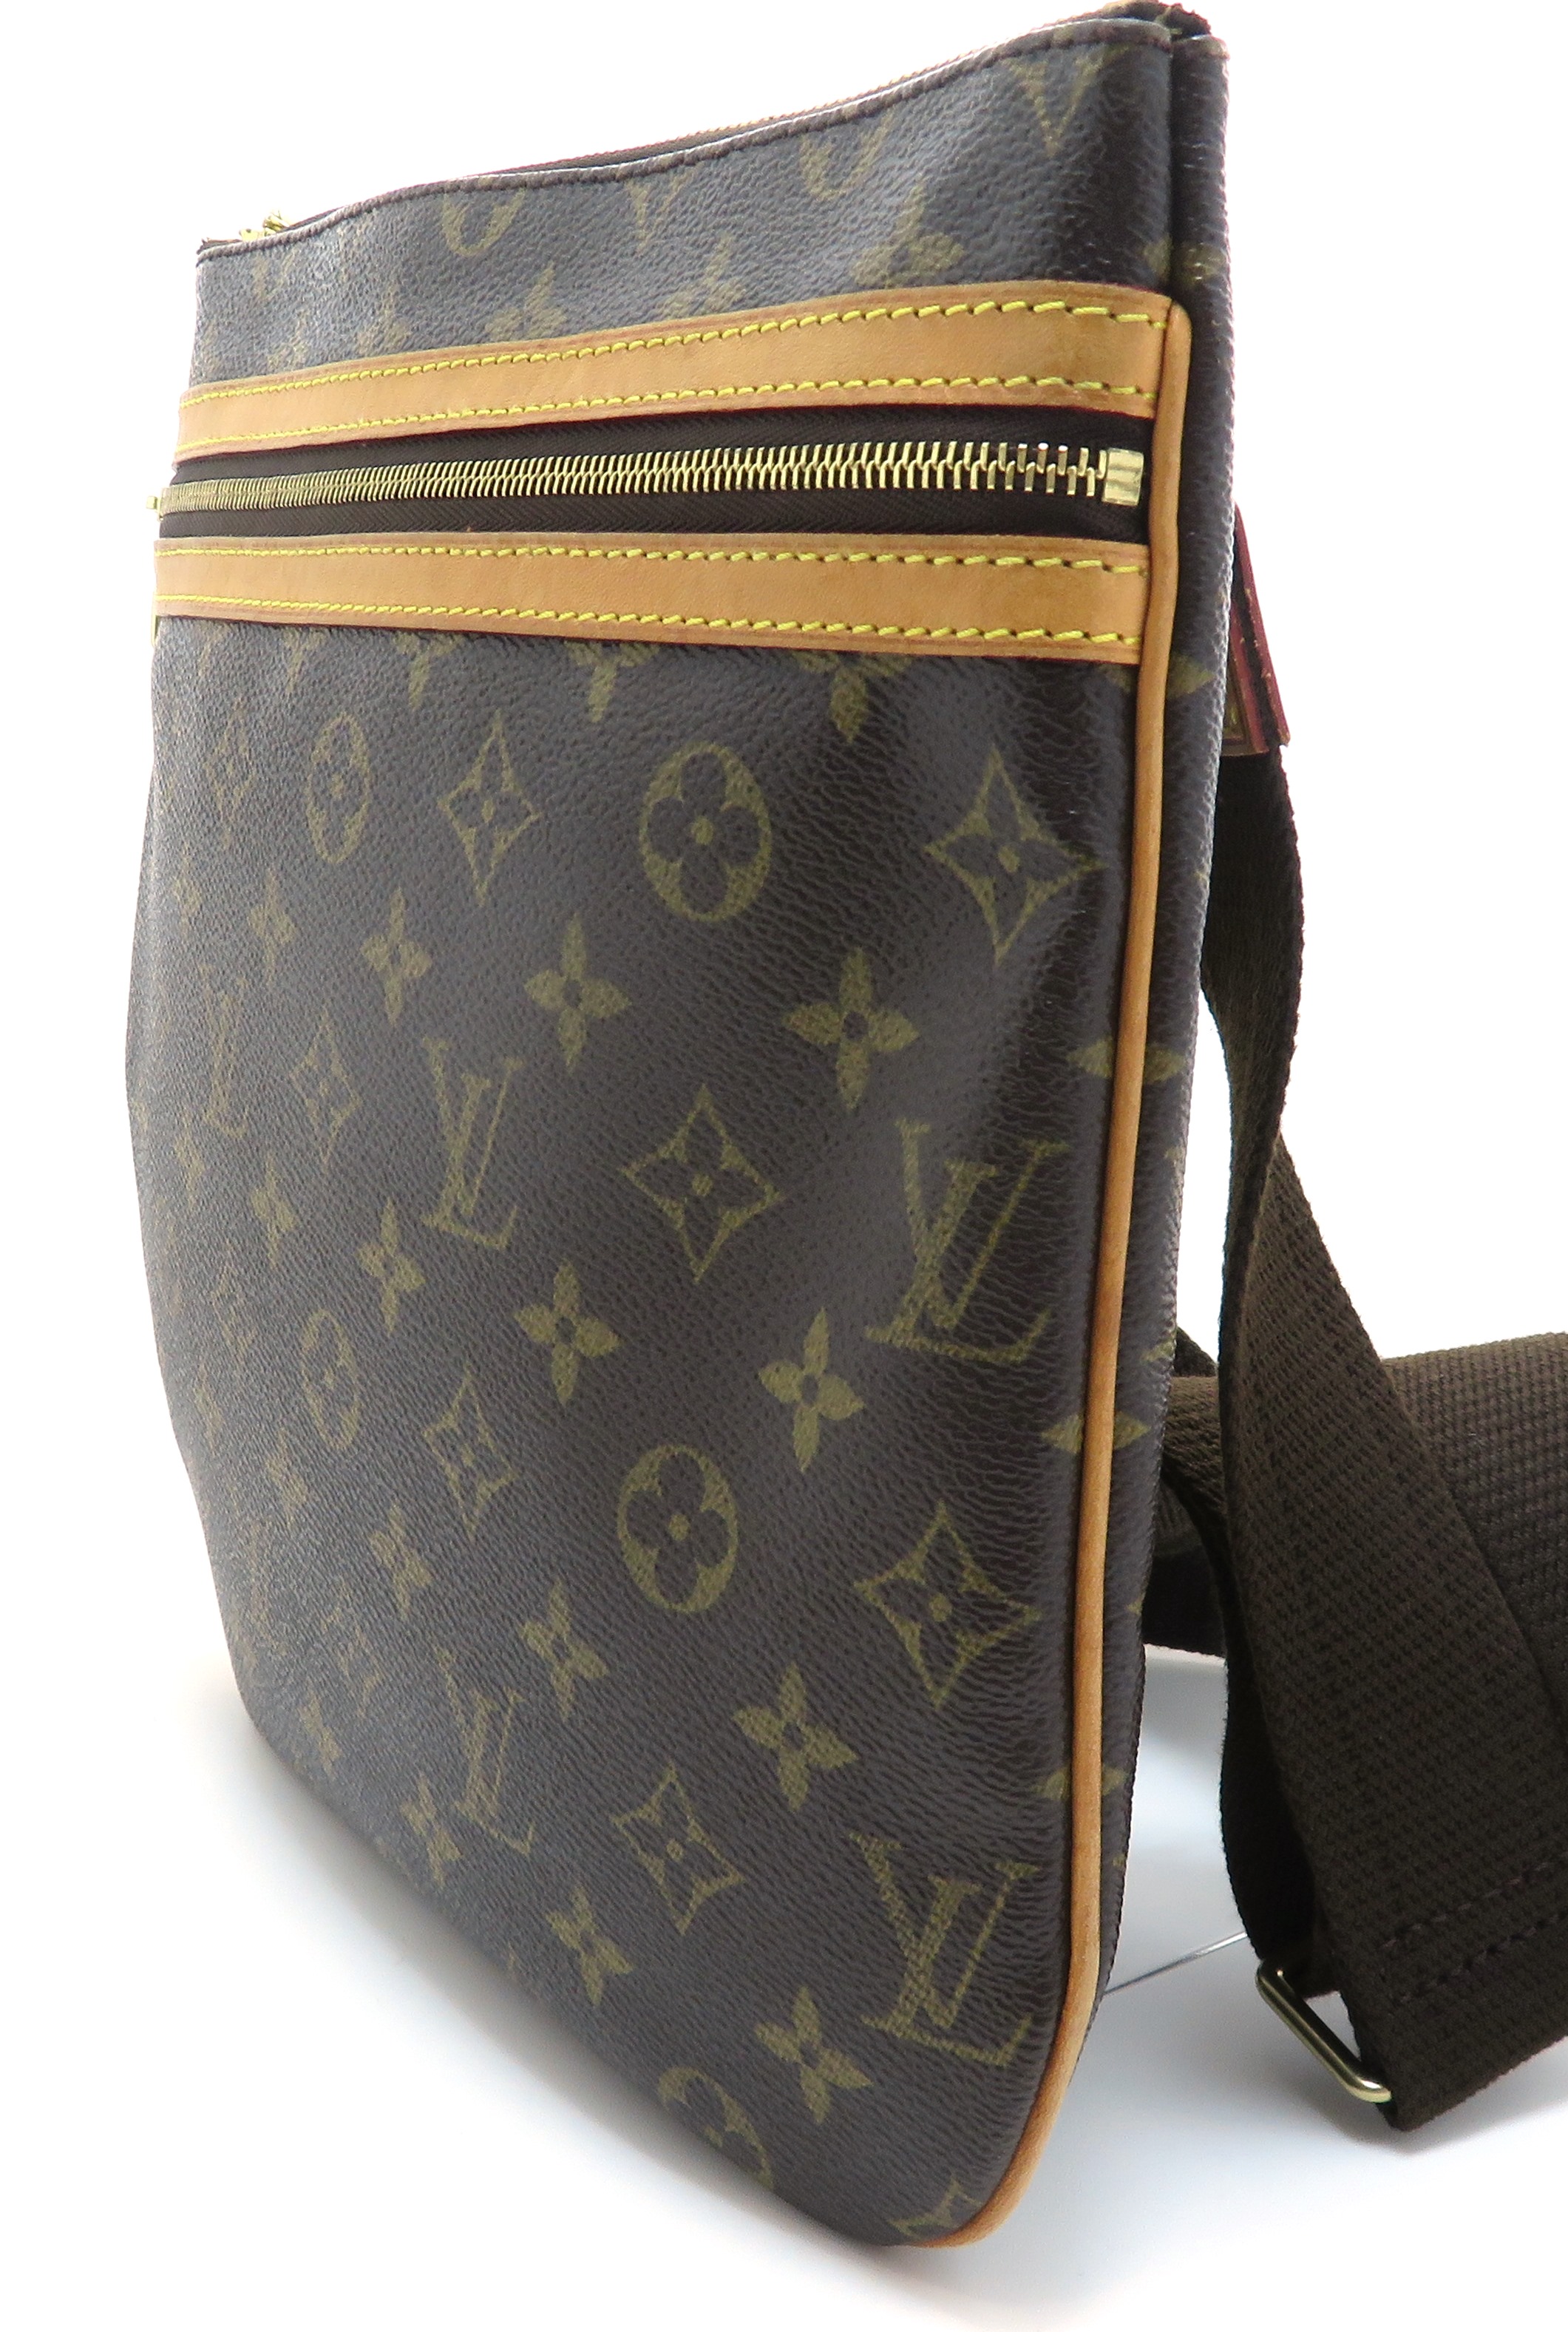 LOUIS VUITTON ルイヴィトン ポシェット・ボスフォール M40044